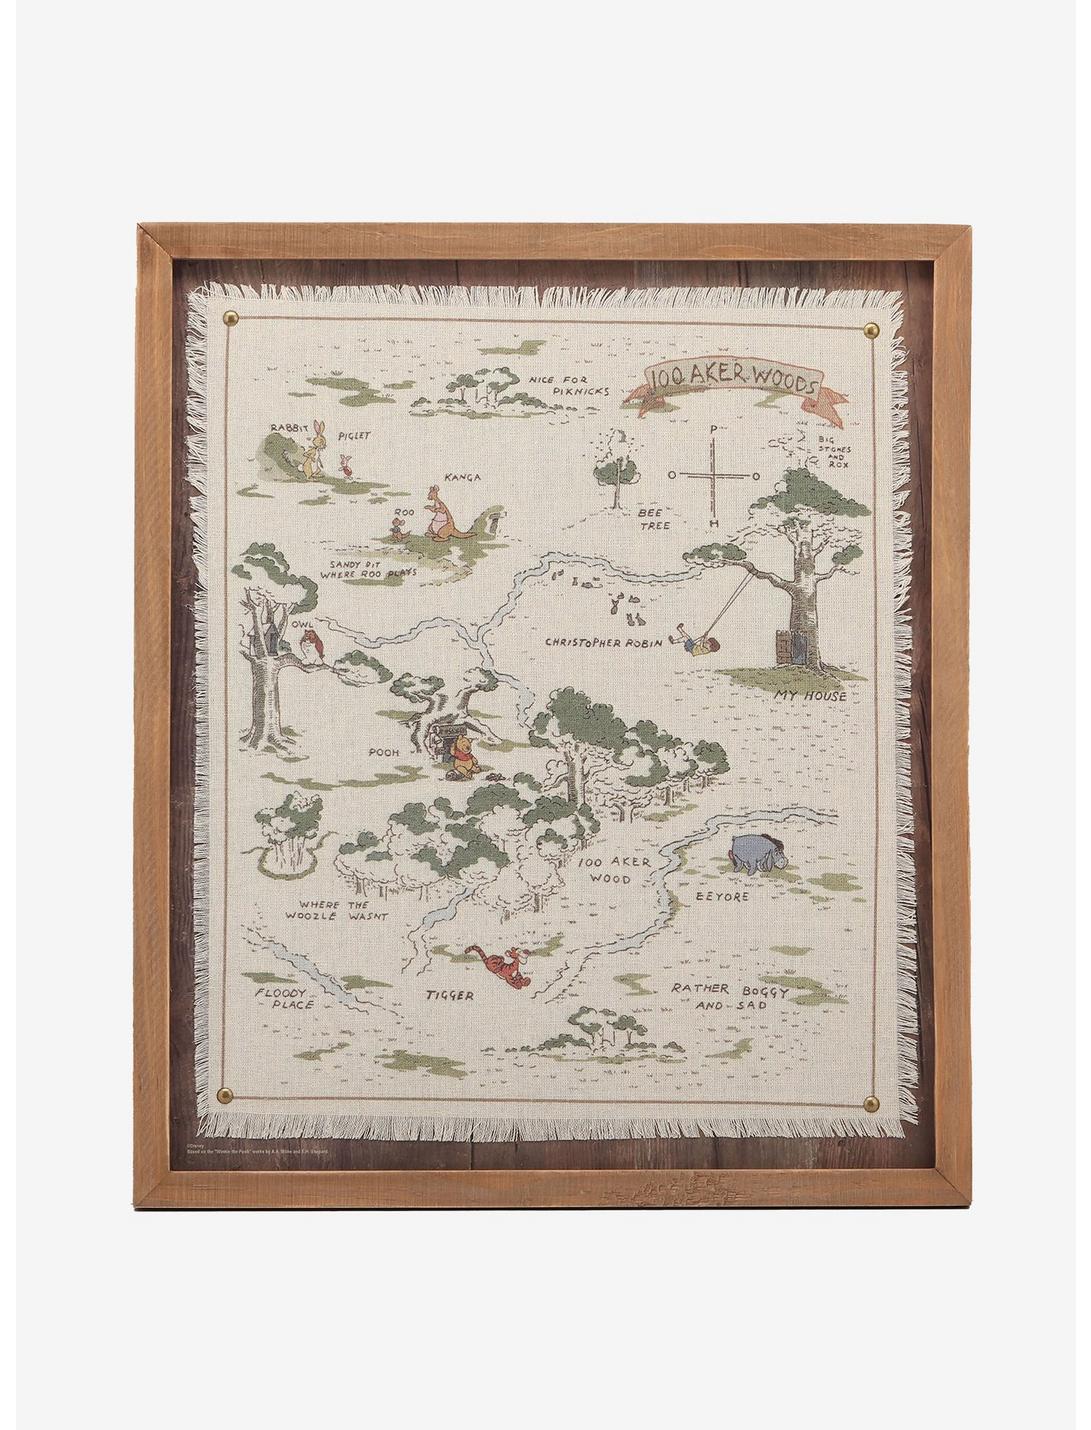 Disney Winnie The Pooh Hundred Acre Wood Map Framed Wood Wall Decor, , hi-res